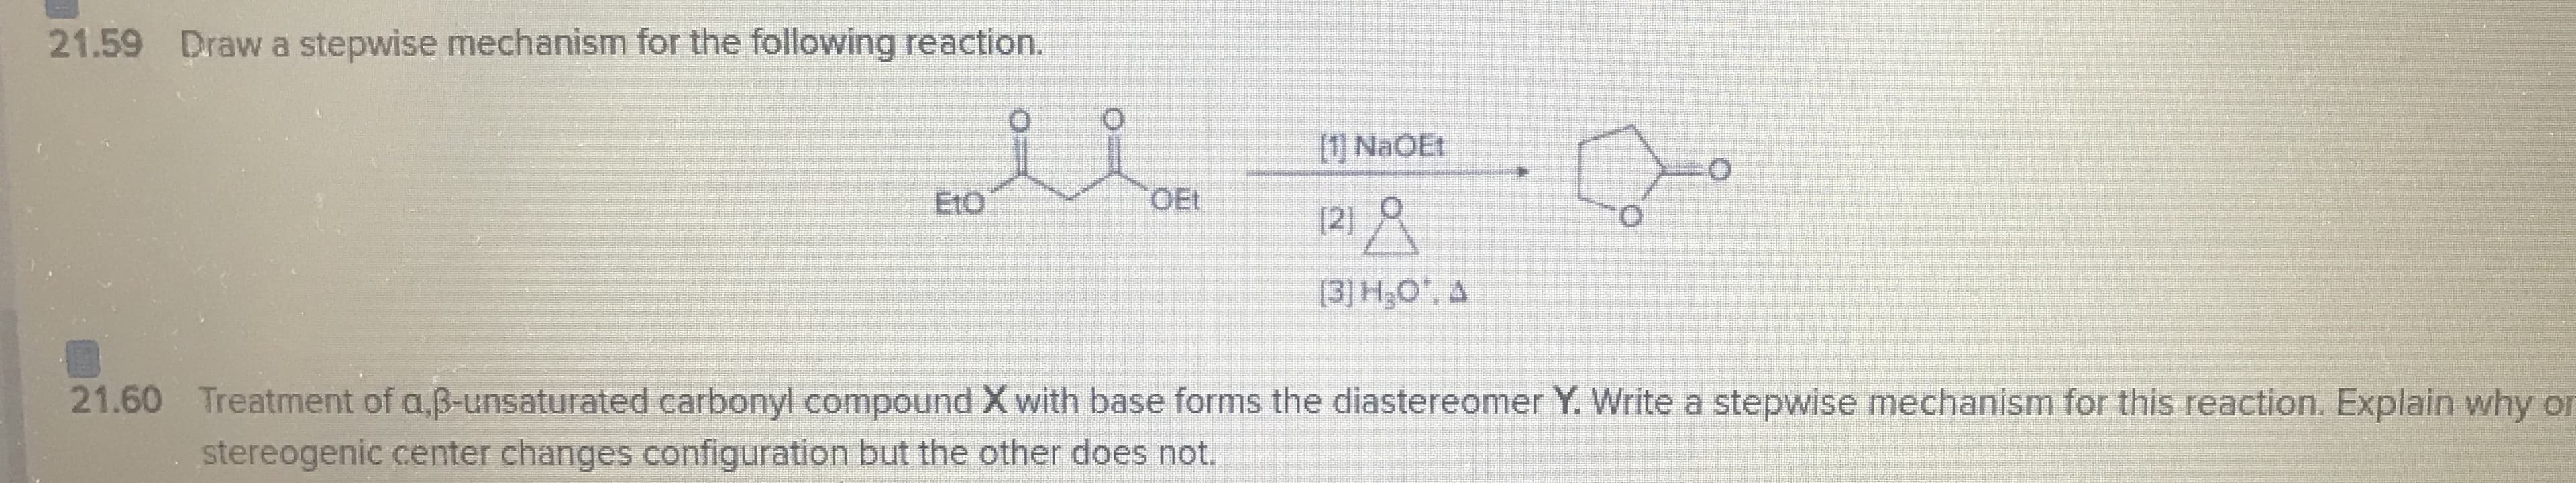 Draw a stepwise mechanism for the following reaction.
[1) NaOEt
EtO
OEt
[2]
[3] H,O, A
